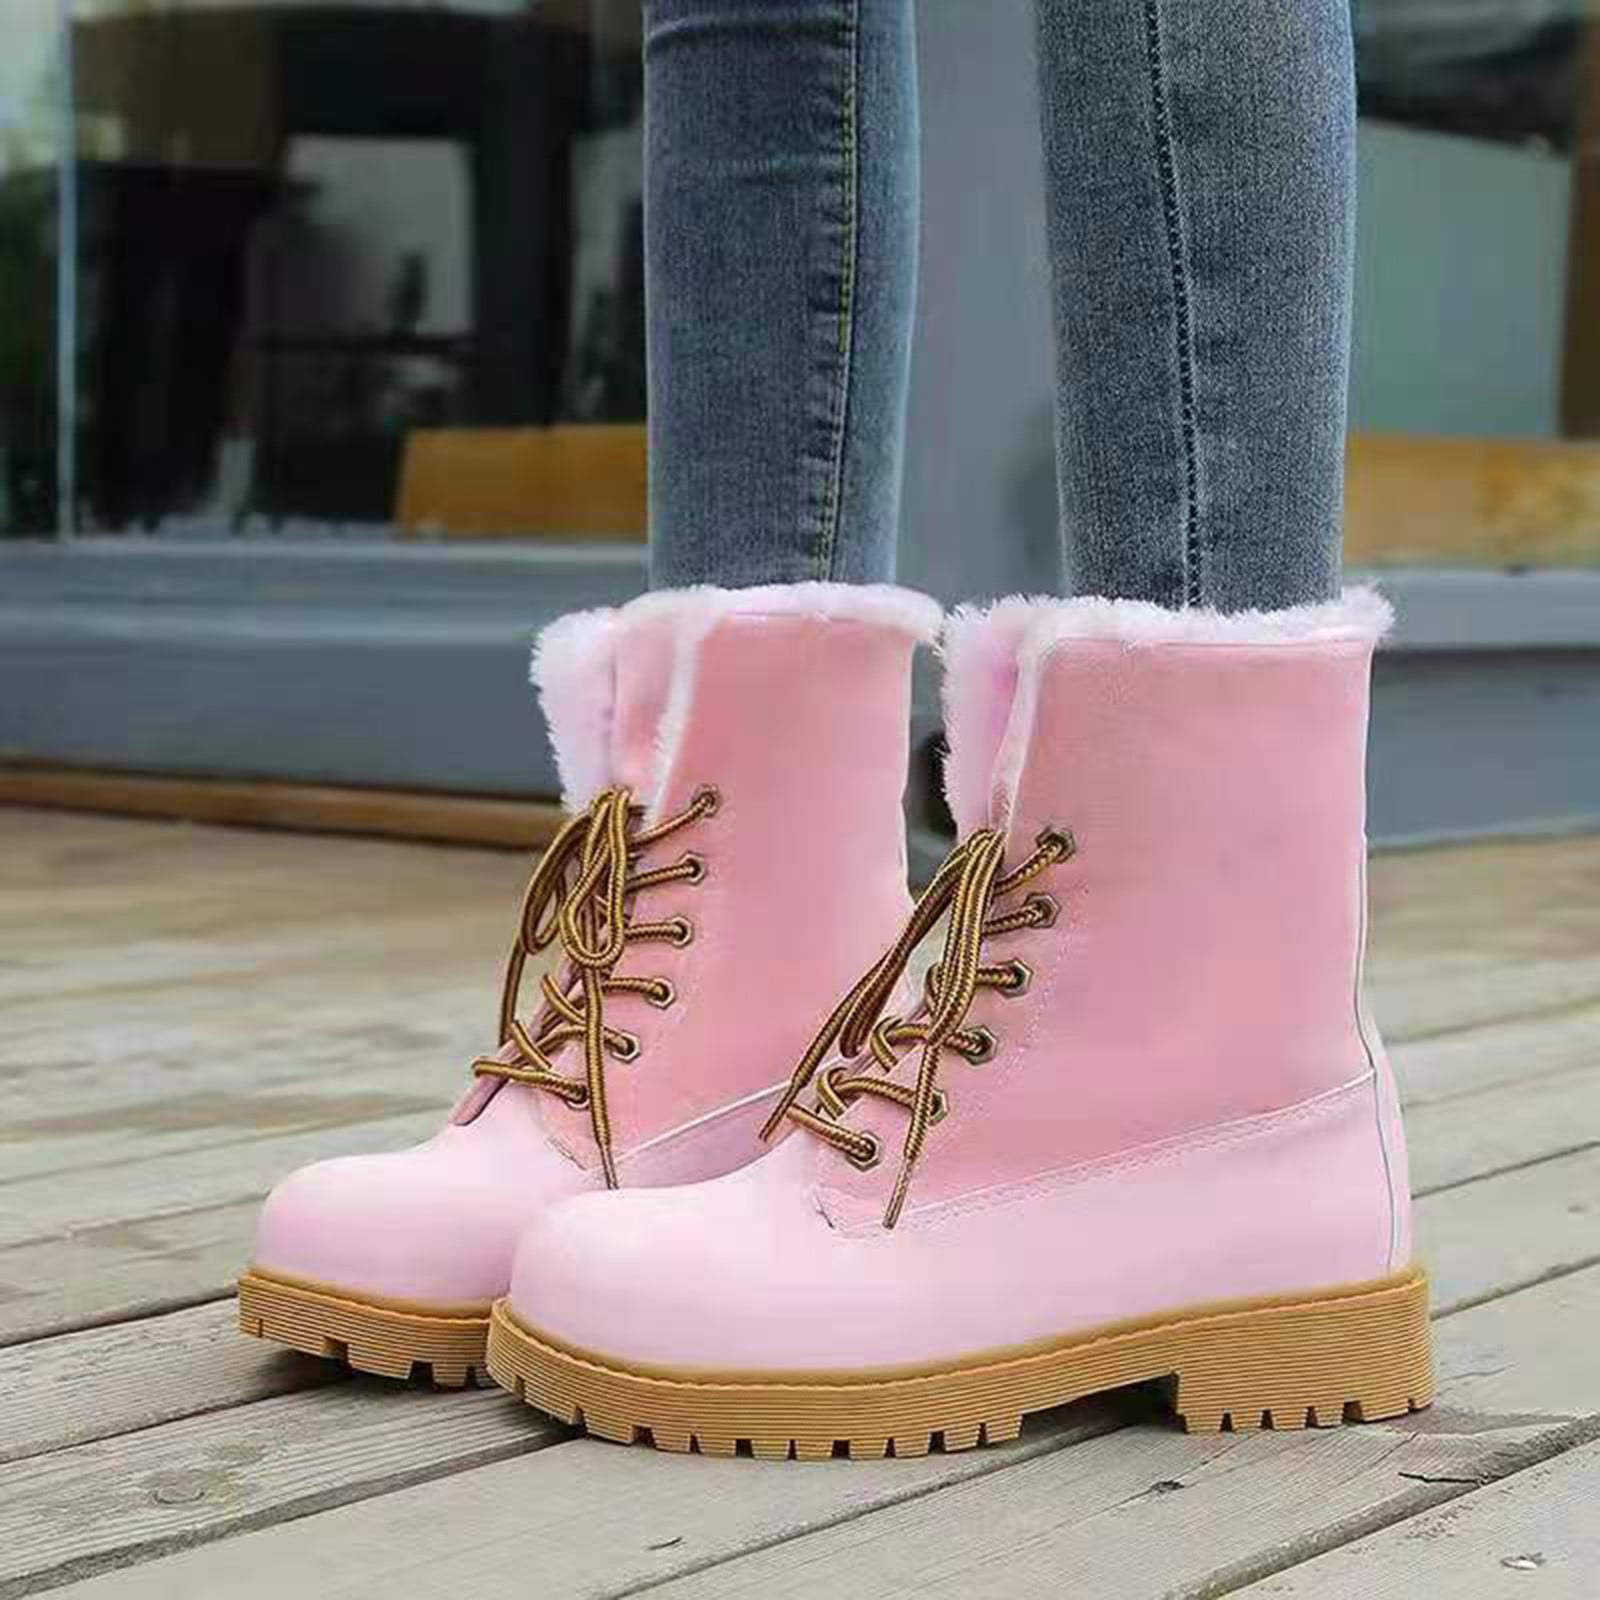 Women's Winter Snow Boots Lace-Up Velvet Ankle Boot Outdoor Flat Shoes Warm New 